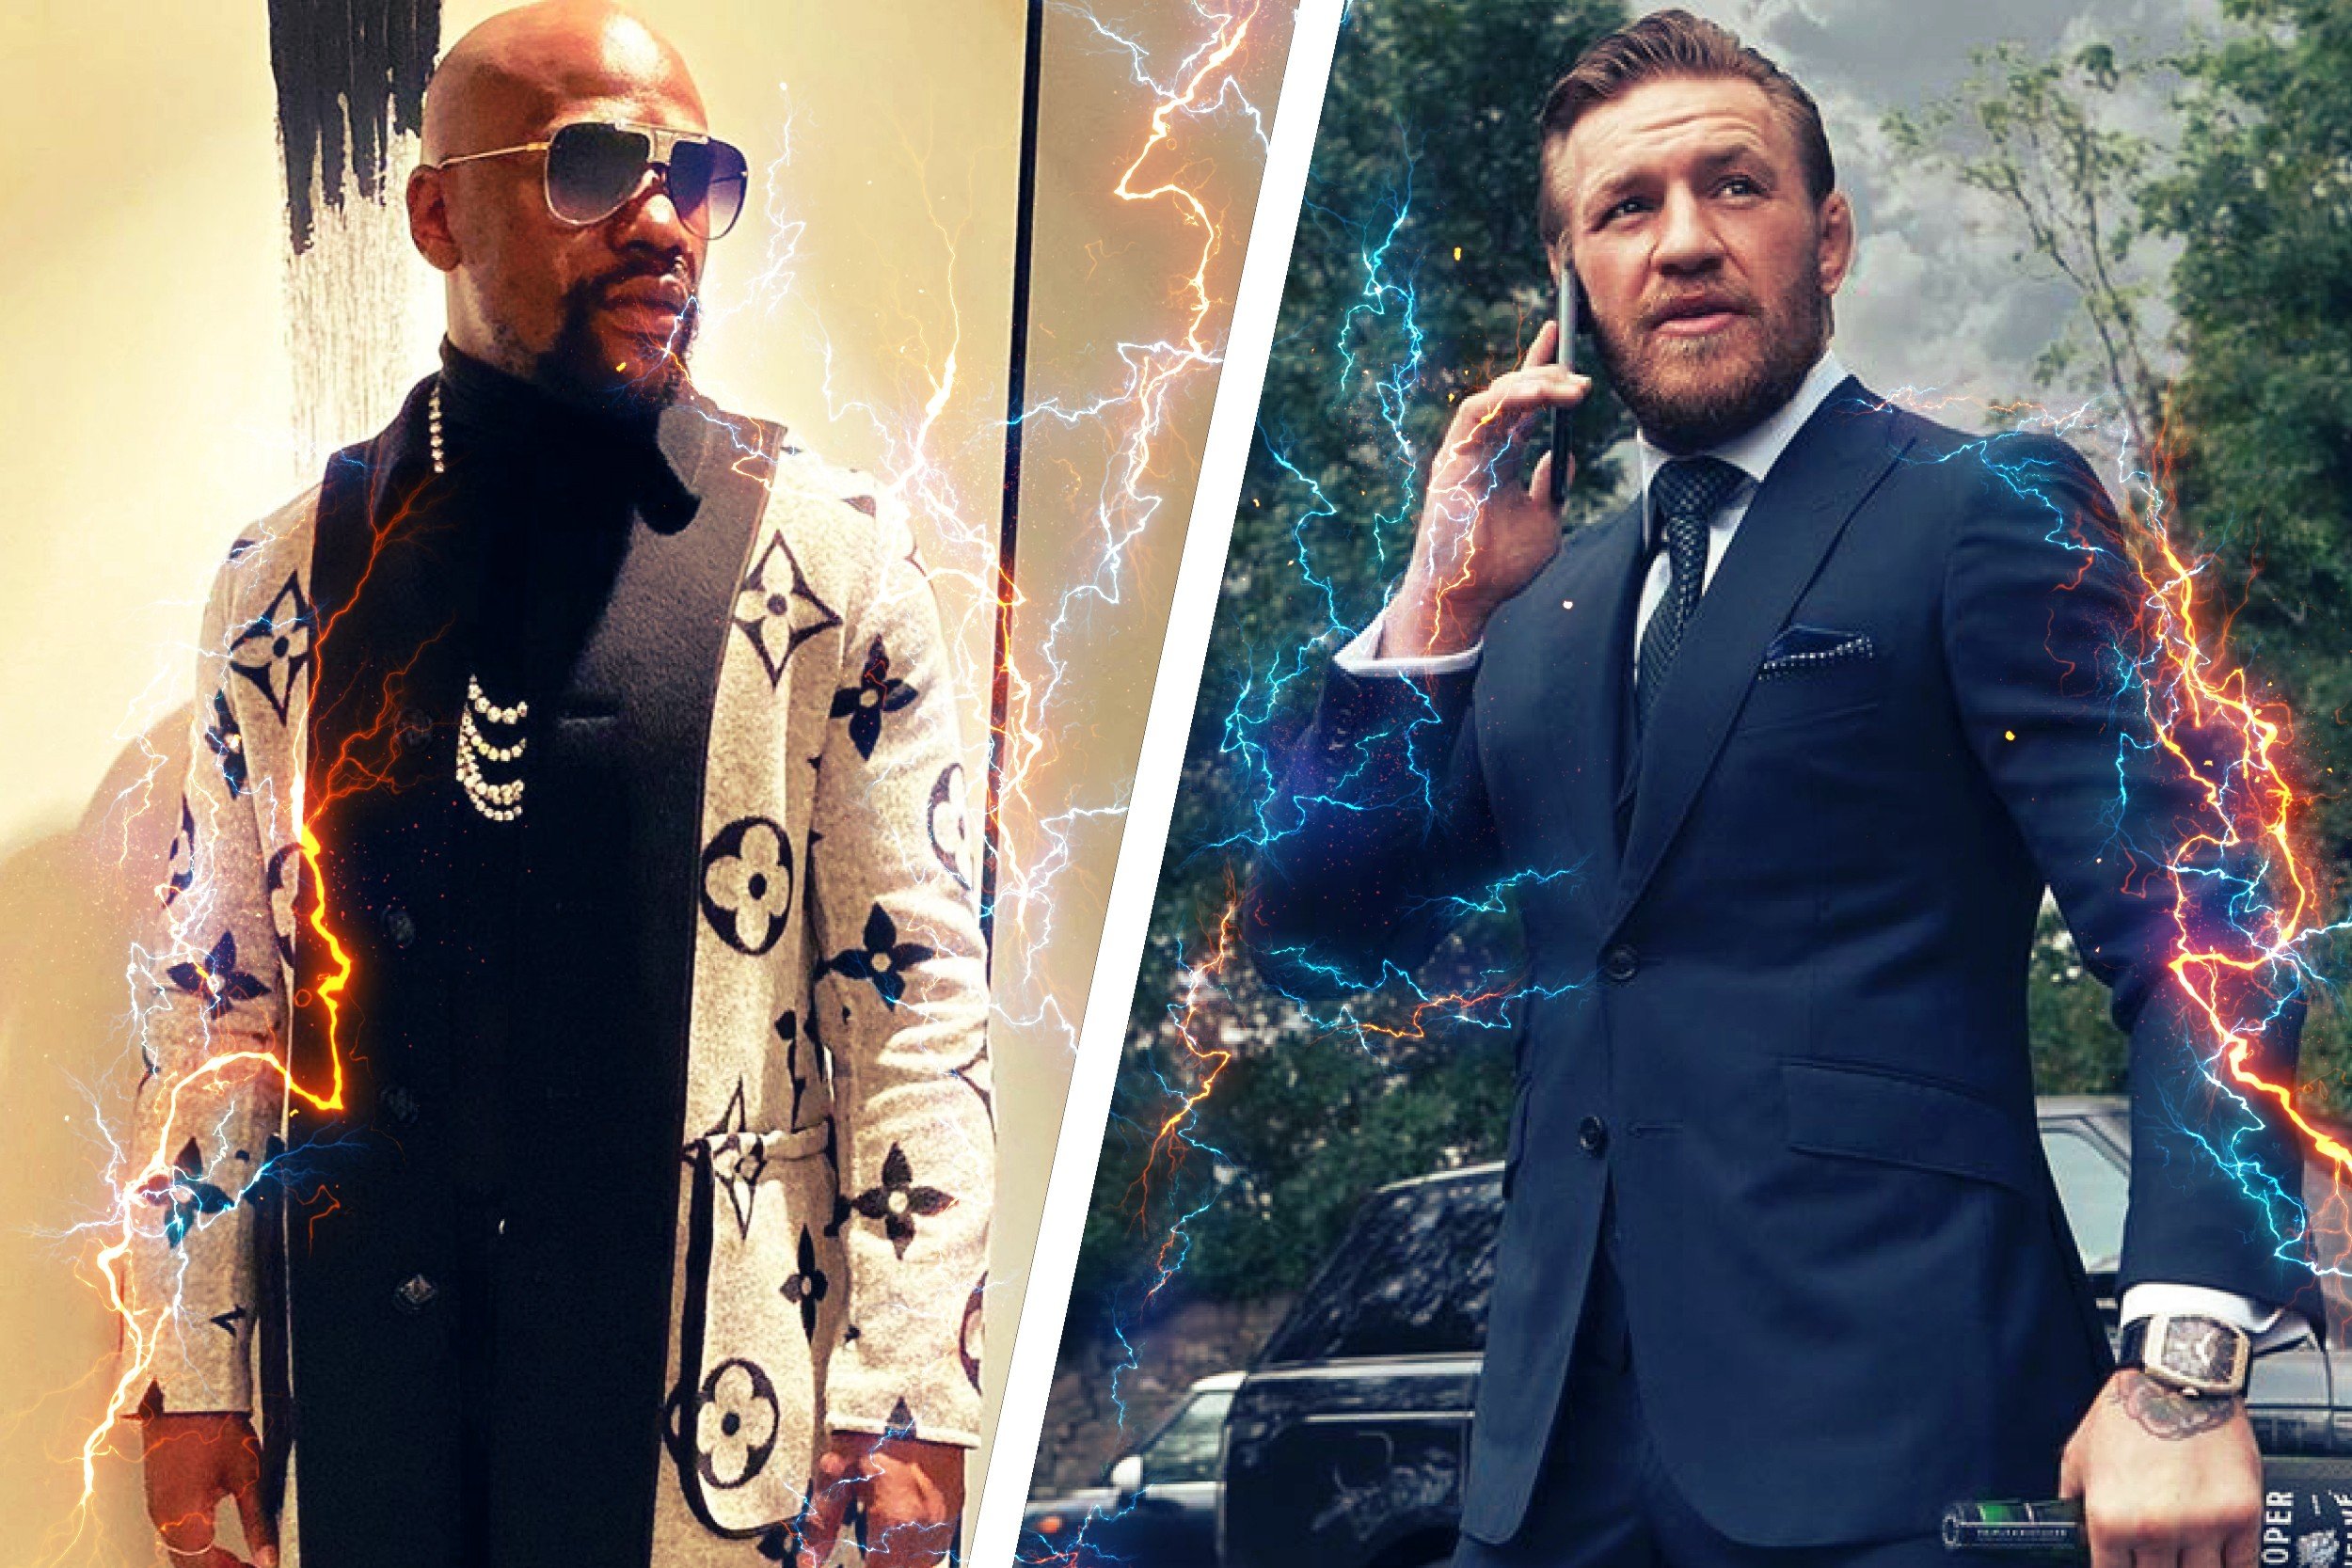 American boxer Floyd Mayweather Jnr and Irish UFC lightweight champion Conor McGregor may have already settled their score in the ring – Mayweather won – but who leads the most fabulous life when the gloves are off? Photo: Instagram